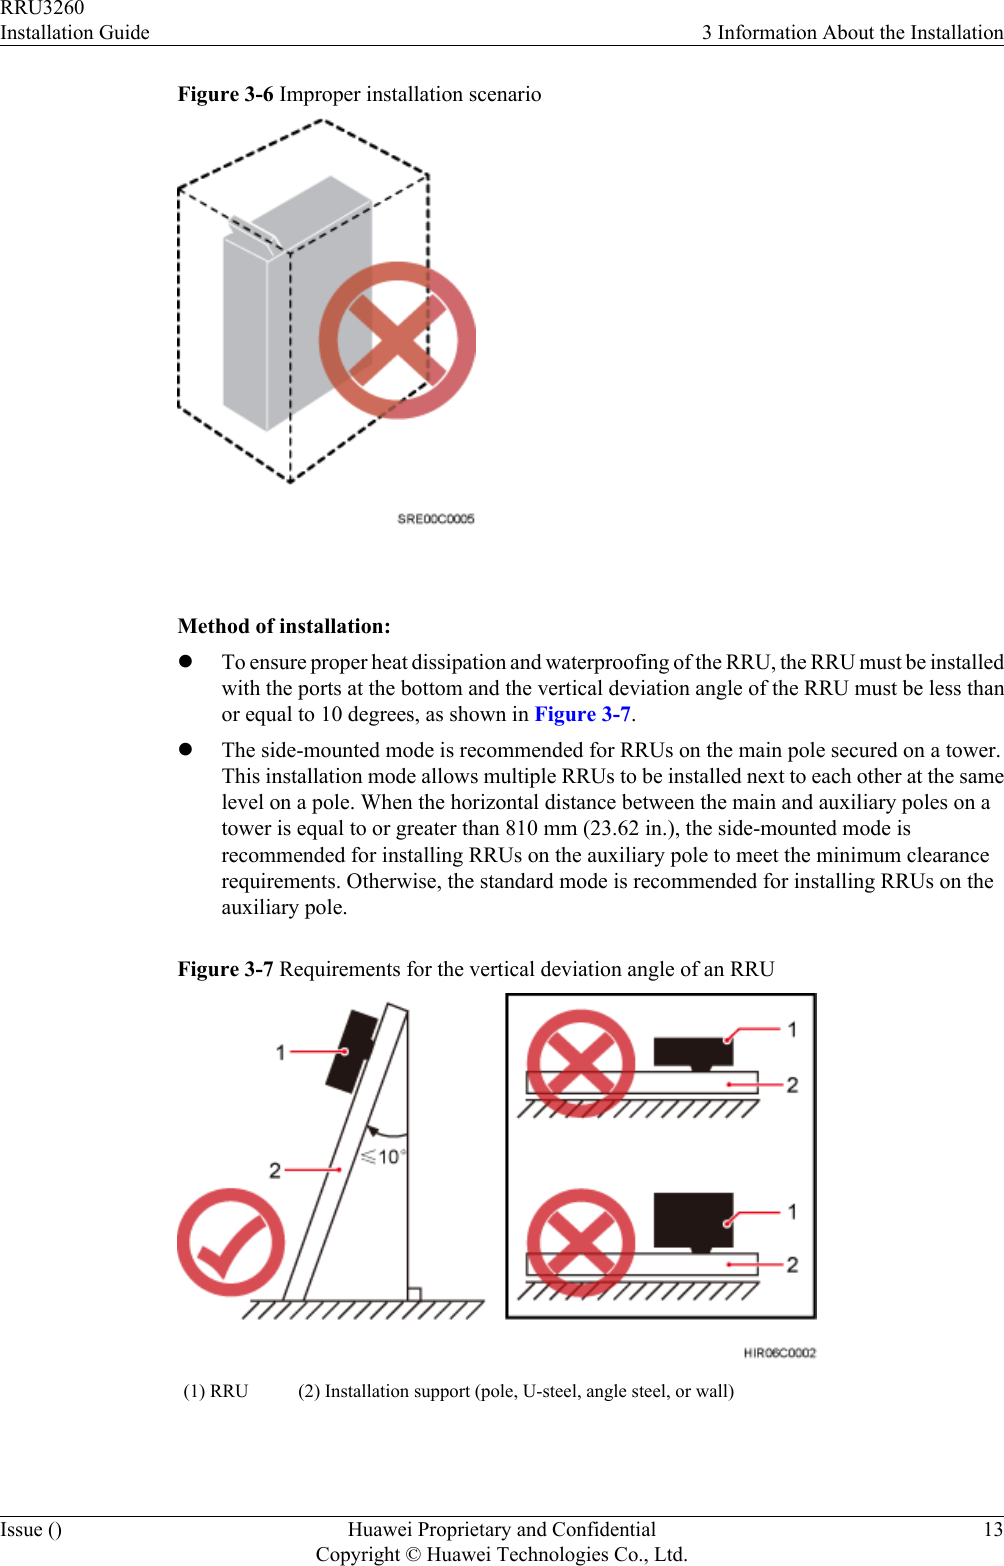 Figure 3-6 Improper installation scenario Method of installation:lTo ensure proper heat dissipation and waterproofing of the RRU, the RRU must be installedwith the ports at the bottom and the vertical deviation angle of the RRU must be less thanor equal to 10 degrees, as shown in Figure 3-7.lThe side-mounted mode is recommended for RRUs on the main pole secured on a tower.This installation mode allows multiple RRUs to be installed next to each other at the samelevel on a pole. When the horizontal distance between the main and auxiliary poles on atower is equal to or greater than 810 mm (23.62 in.), the side-mounted mode isrecommended for installing RRUs on the auxiliary pole to meet the minimum clearancerequirements. Otherwise, the standard mode is recommended for installing RRUs on theauxiliary pole.Figure 3-7 Requirements for the vertical deviation angle of an RRU(1) RRU (2) Installation support (pole, U-steel, angle steel, or wall) RRU3260Installation Guide 3 Information About the InstallationIssue () Huawei Proprietary and ConfidentialCopyright © Huawei Technologies Co., Ltd.13